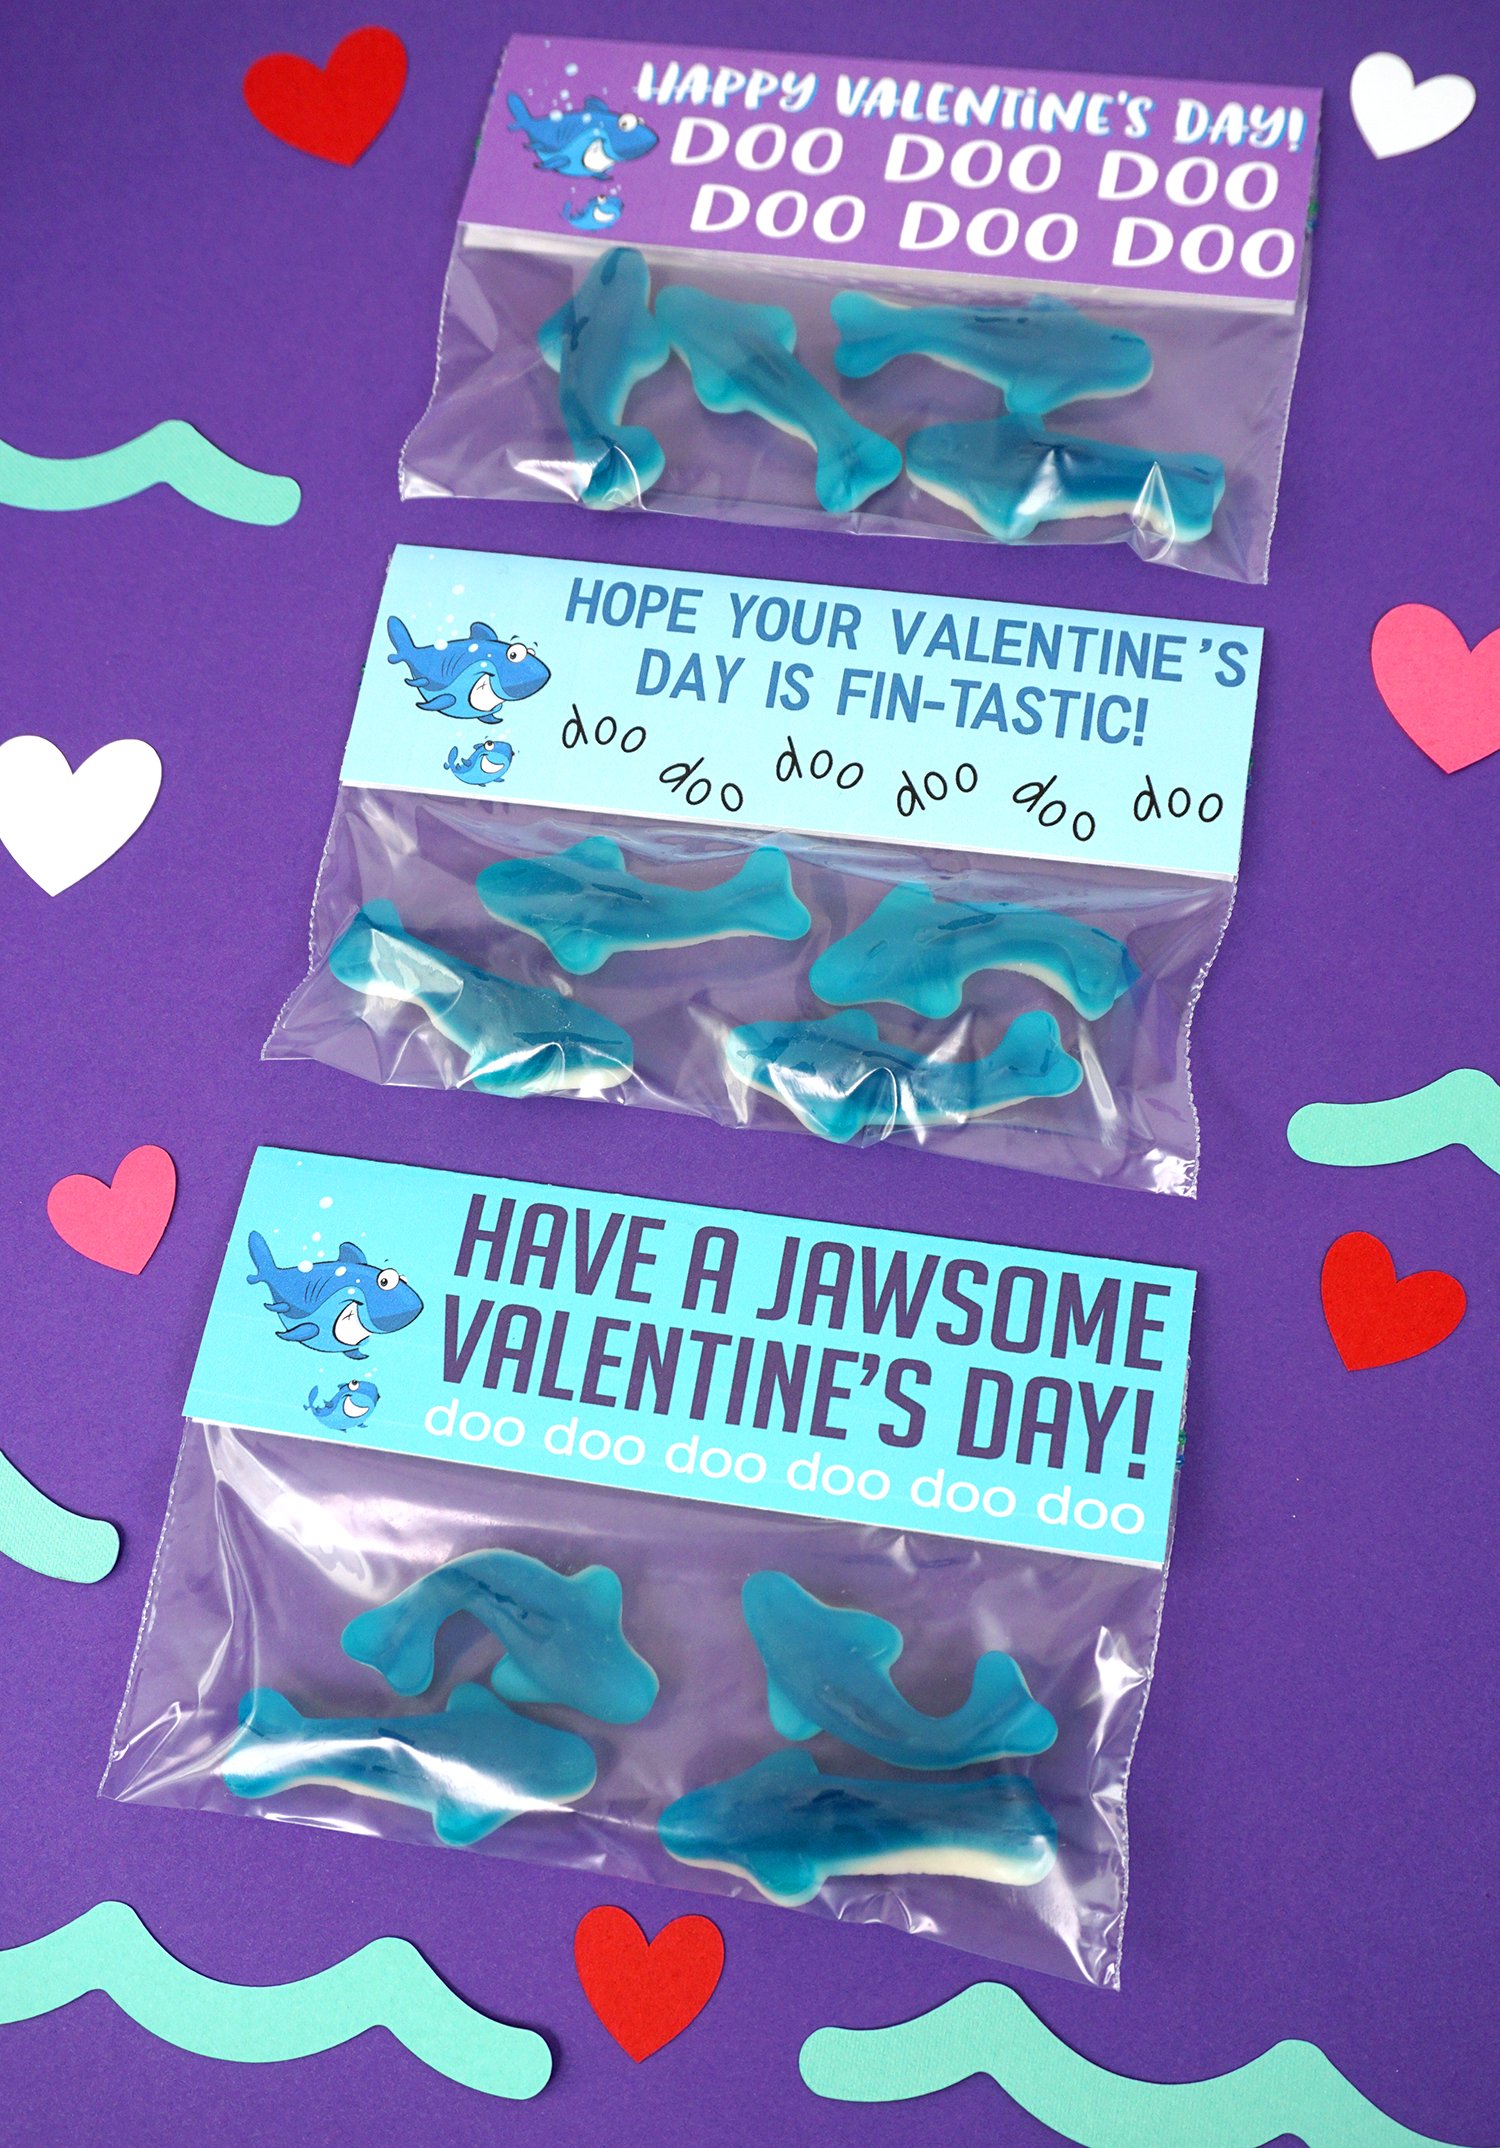 printable valentines cards reads have a jawsome valentines day with shark gummy candies